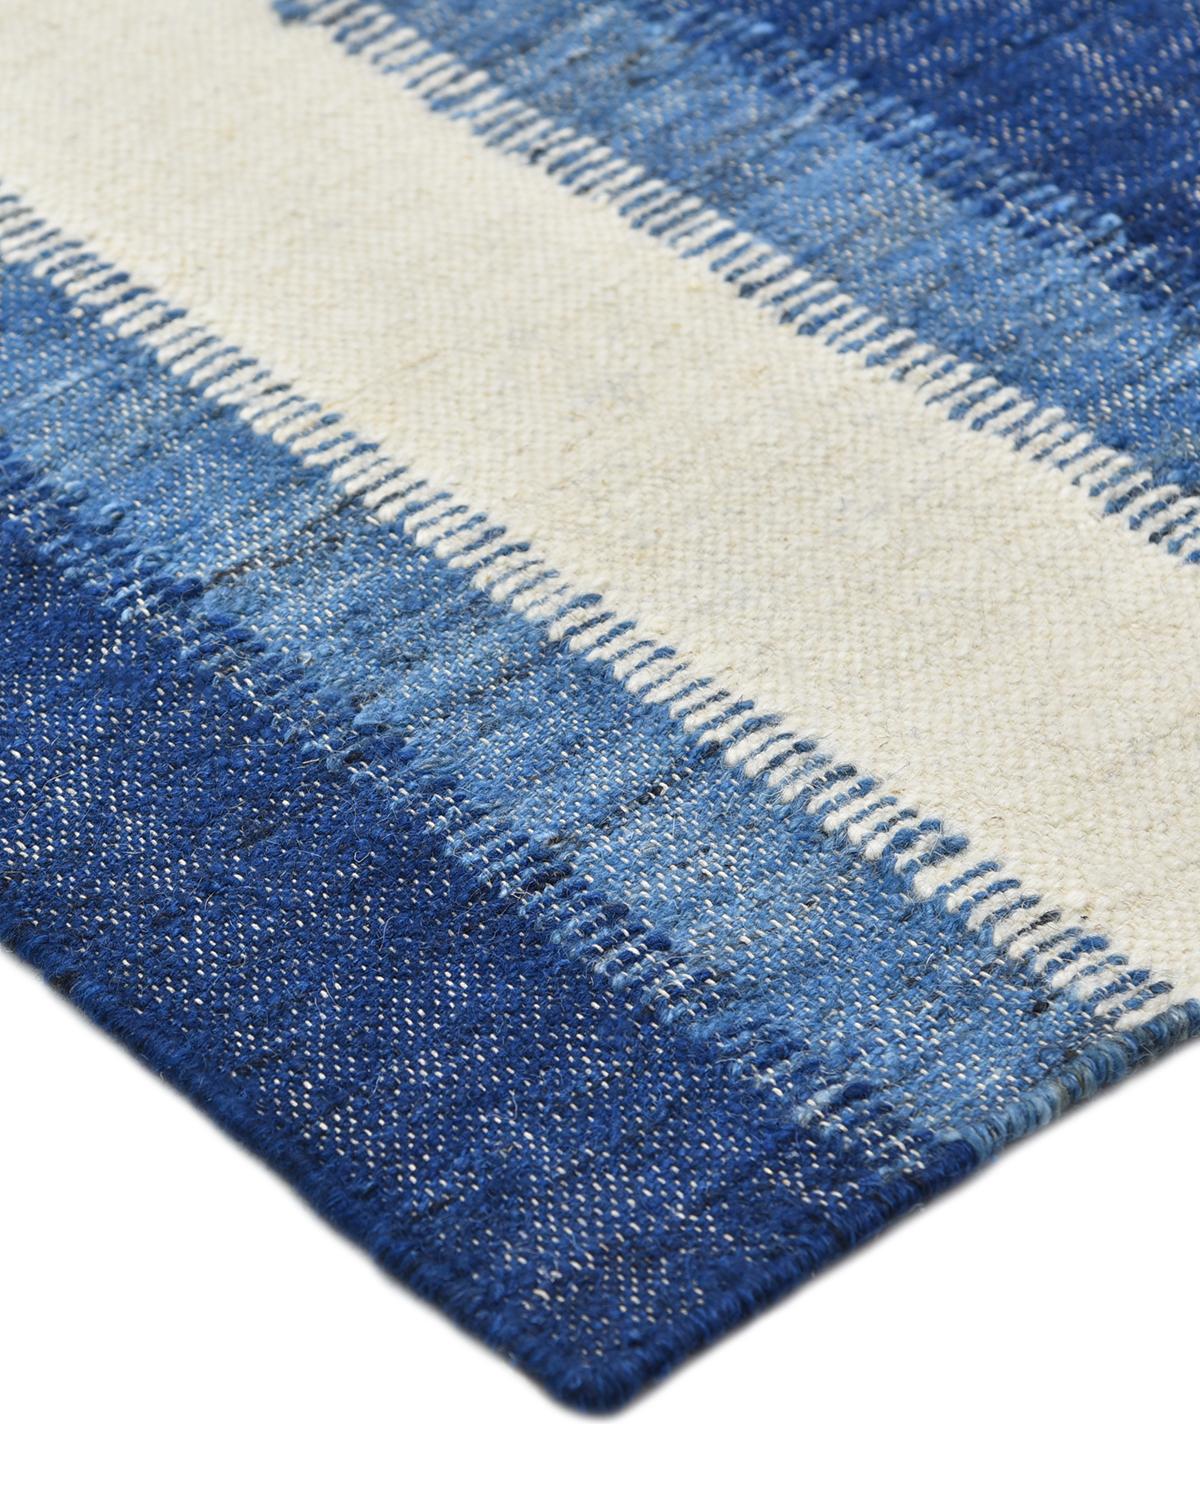 Durable and low-maintenance, flatweave rugs are especially popular for high-traffic rooms. The Flatweave collection is beautiful as well as practical. The quiet patterns and understated colors make them suited for a traditional living rooms as well